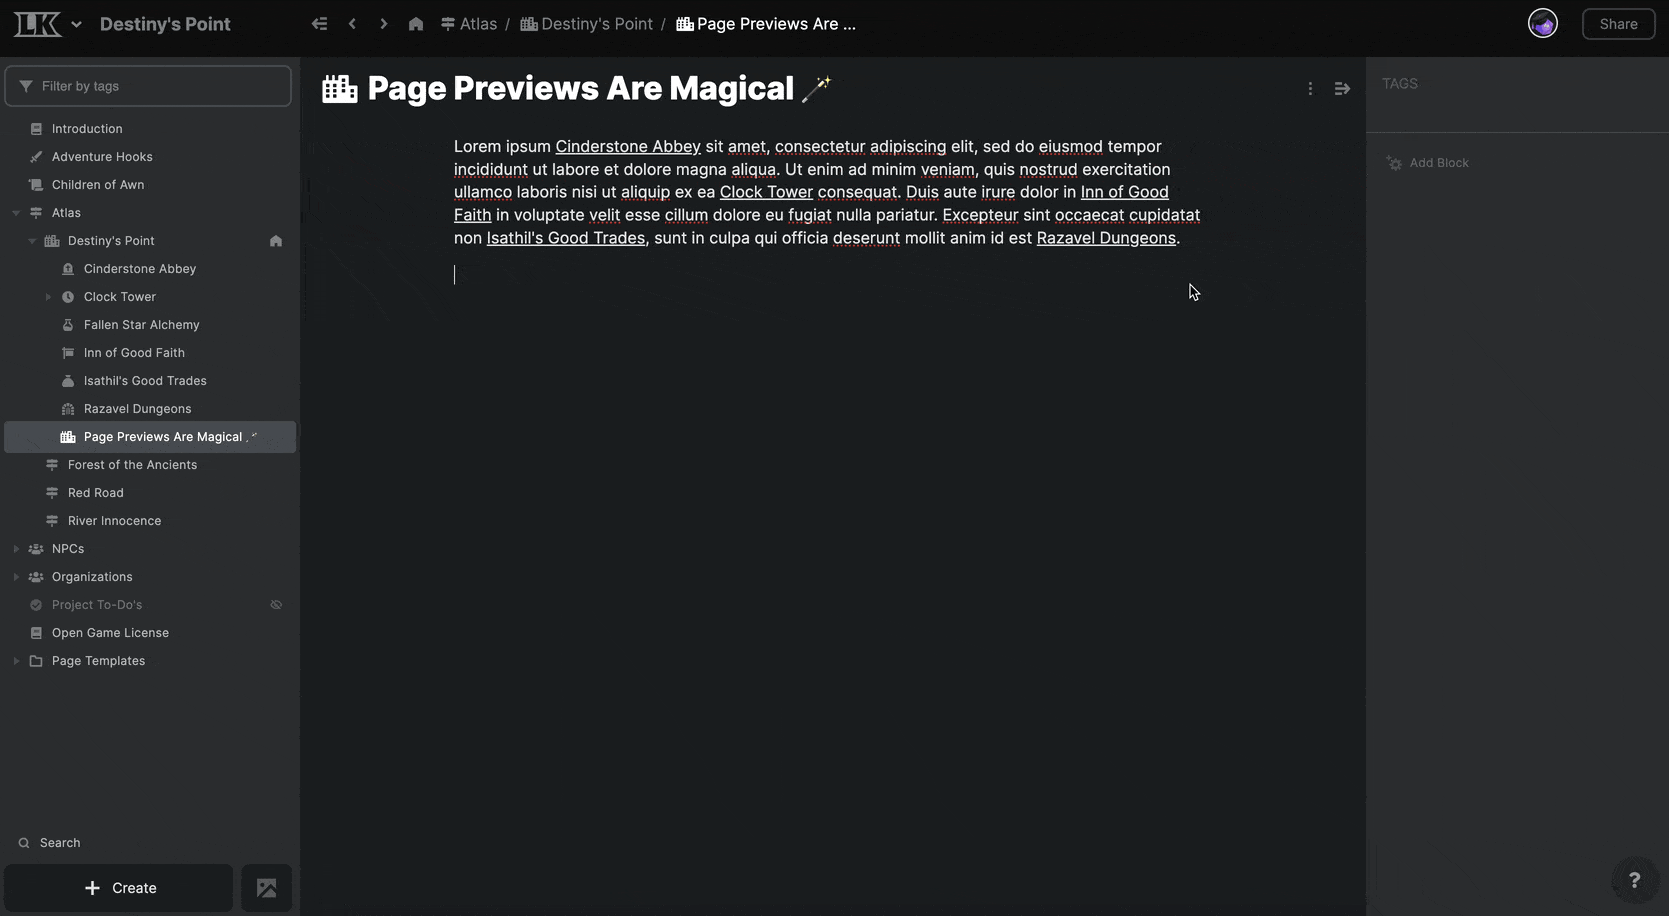 Hovering over various links and showing a modal that previews the next page.